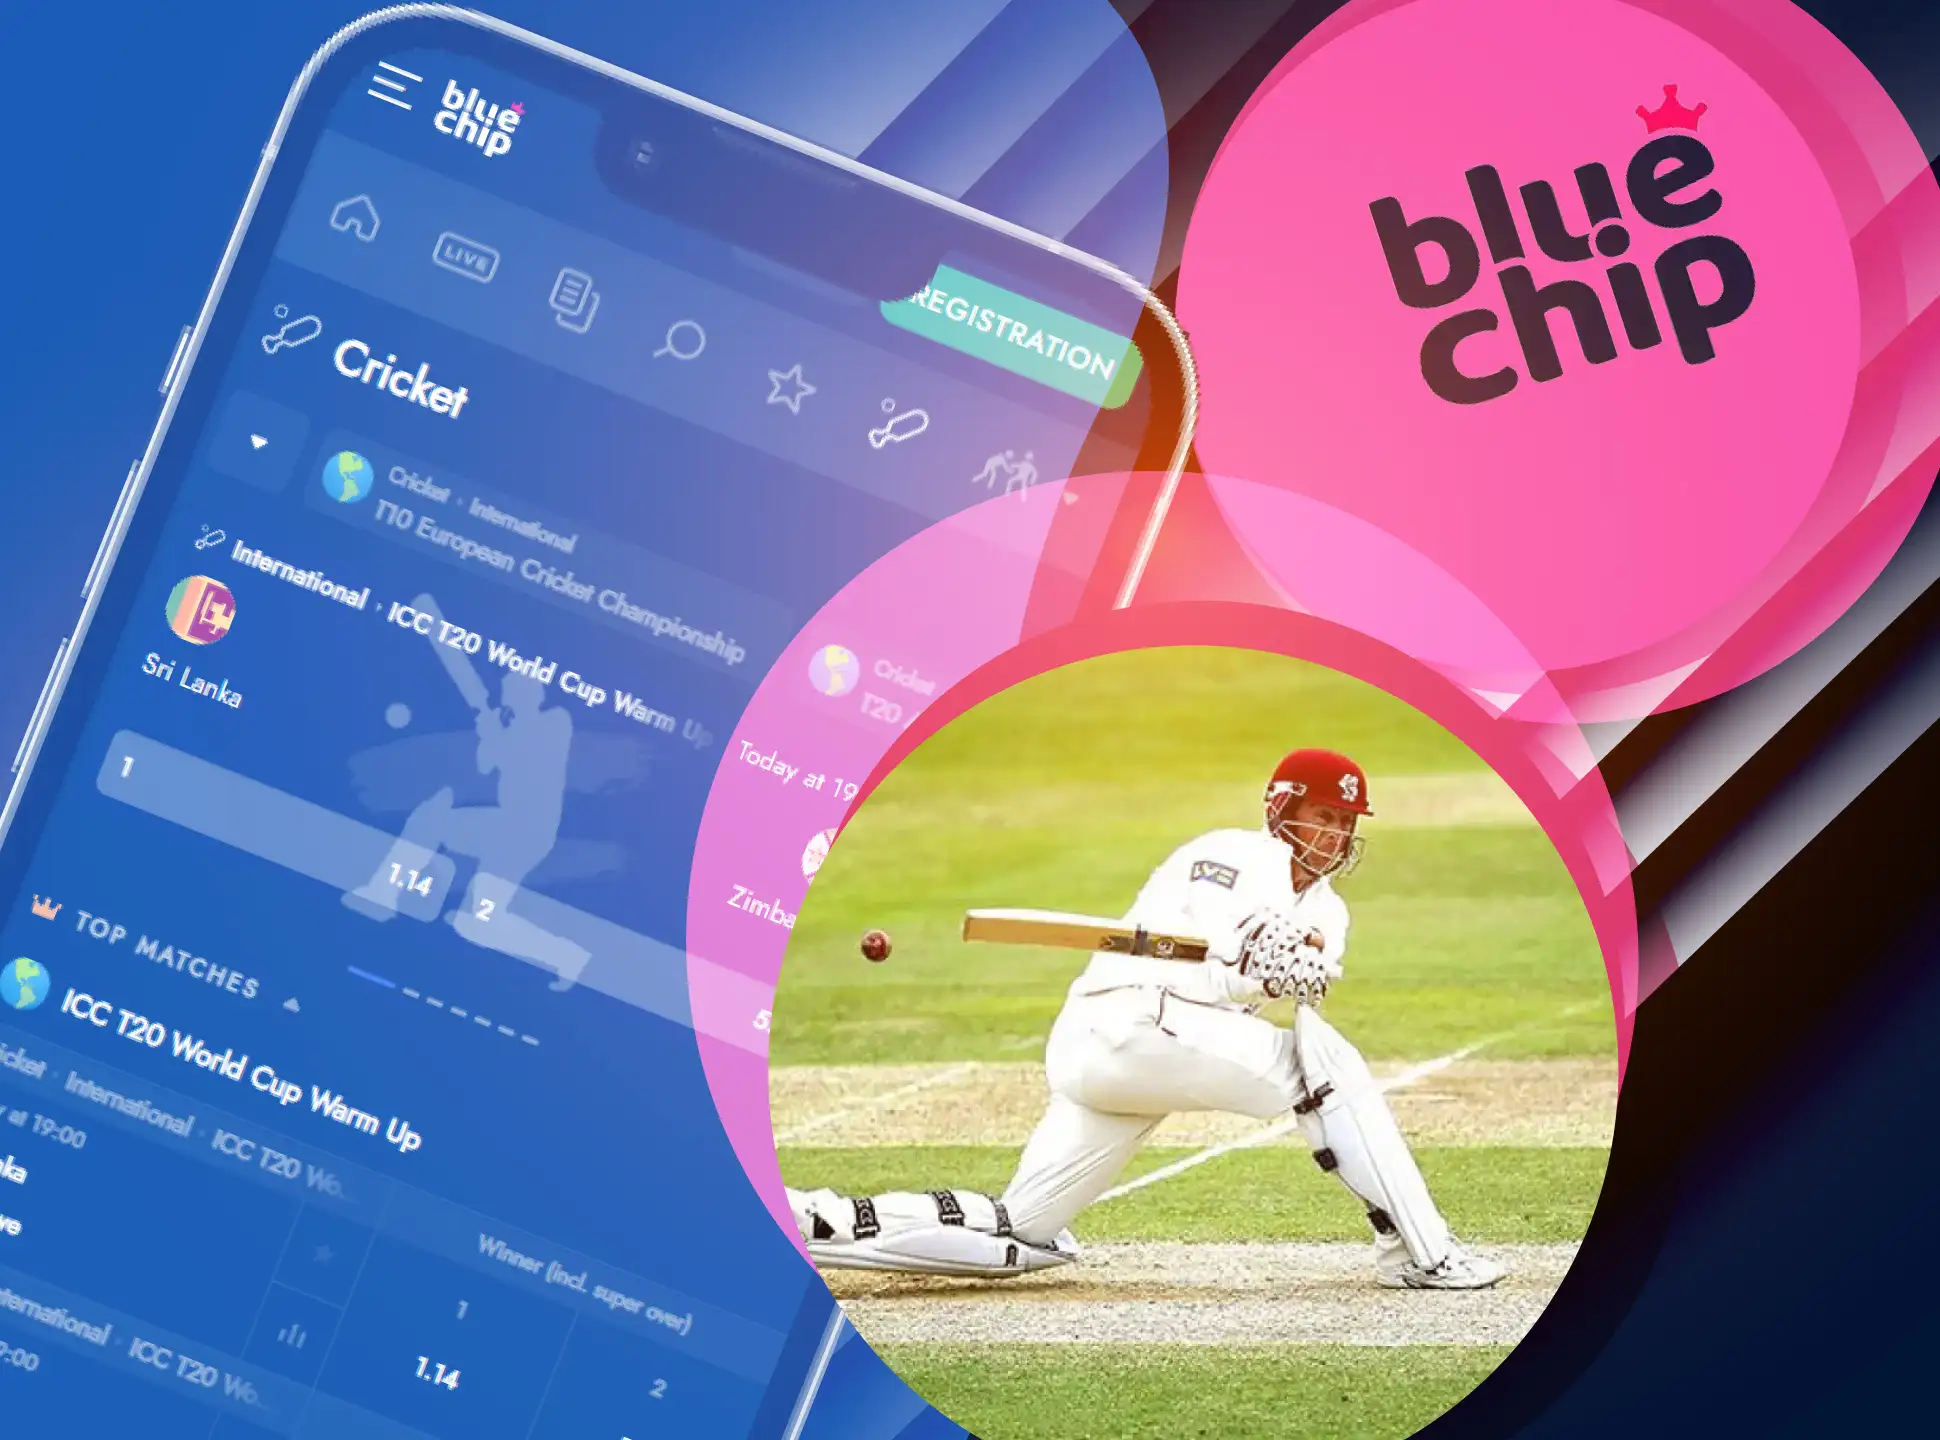 Place bets on cricket matches in the Bluechip application.